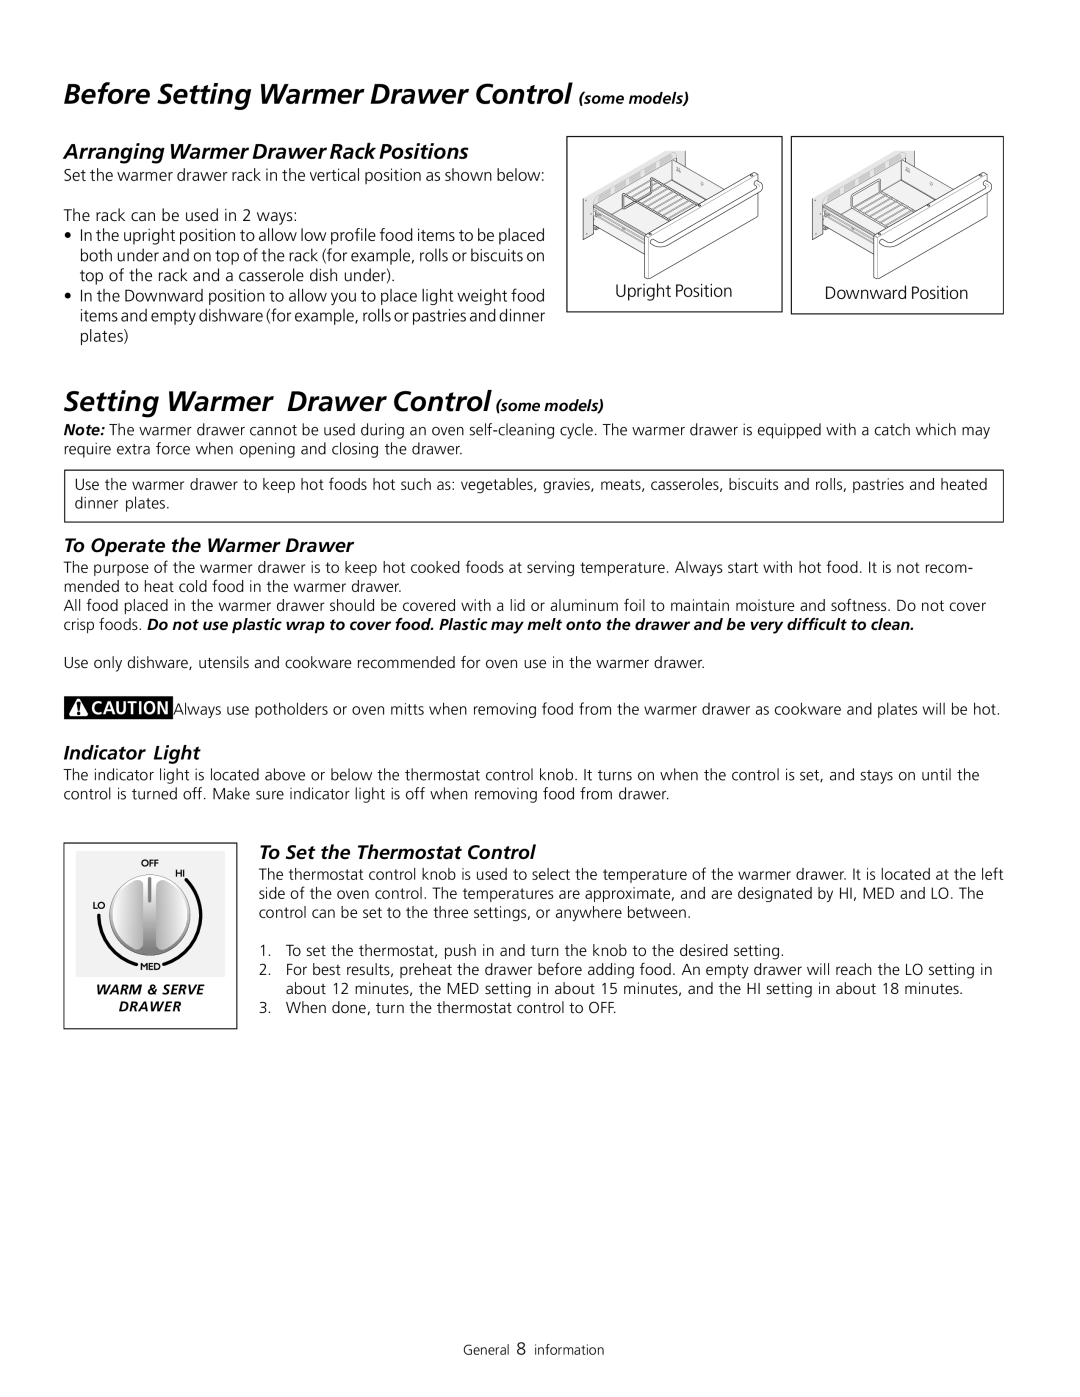 Frigidaire 318200805 warranty Before Setting Warmer Drawer Control some models, Arranging Warmer Drawer Rack Positions 